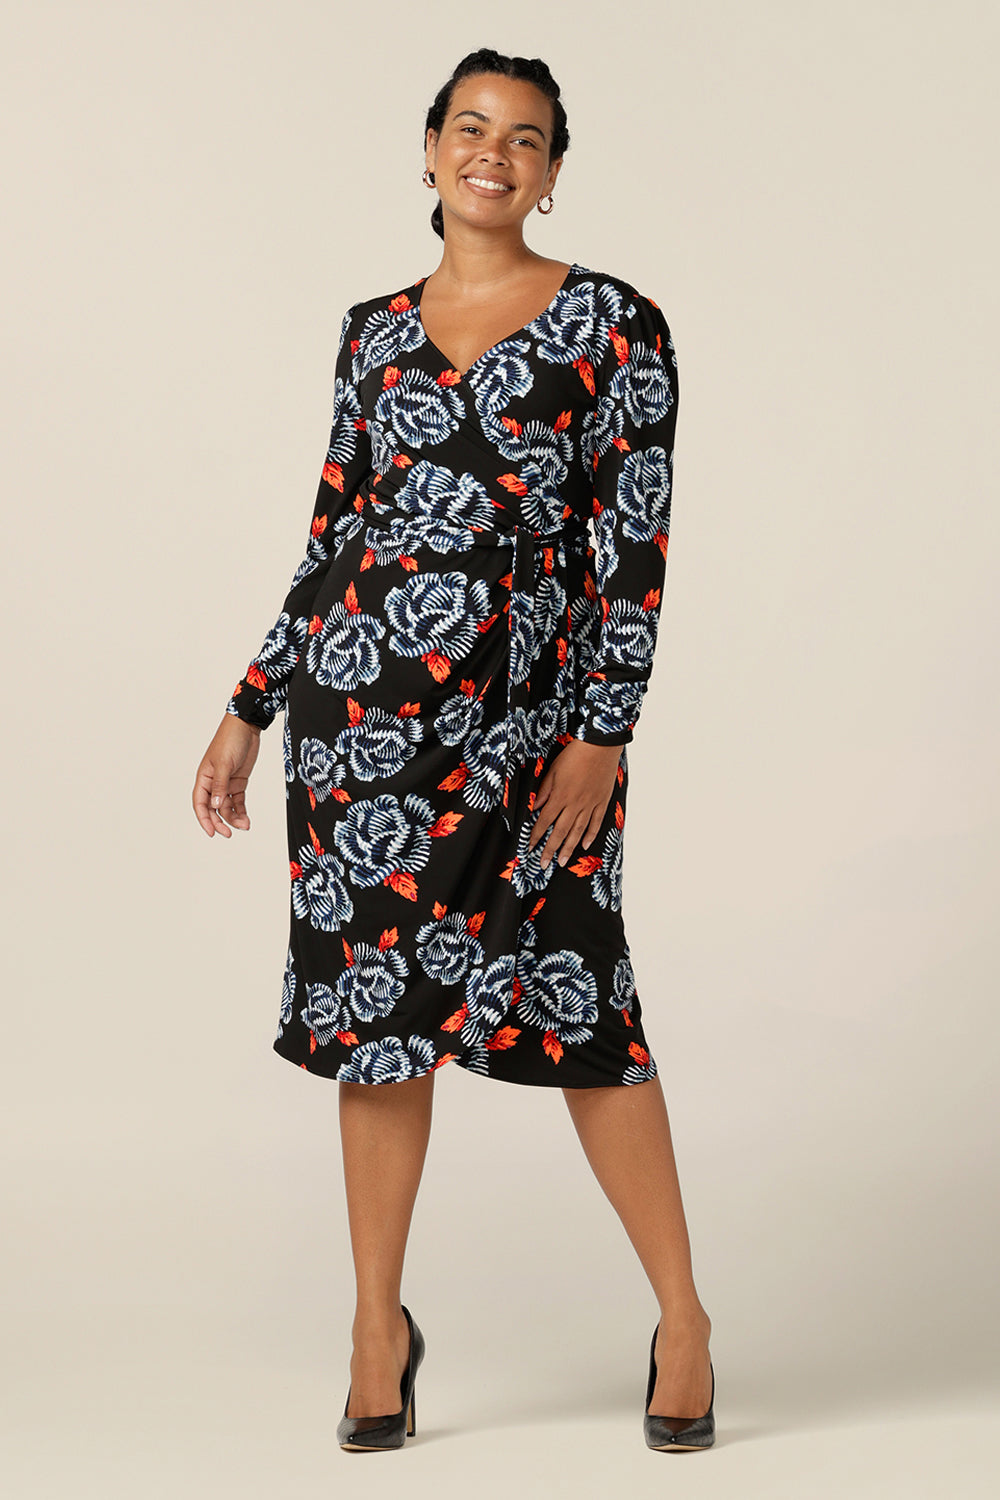 A jersey wrap dress crafted with Australian-made expertise, this wrap dress features ruched details, flattering tulip skirt and long sleeves. Designed for women in sizes 8 to 24, this dress is good for work wear and smart-casual style.